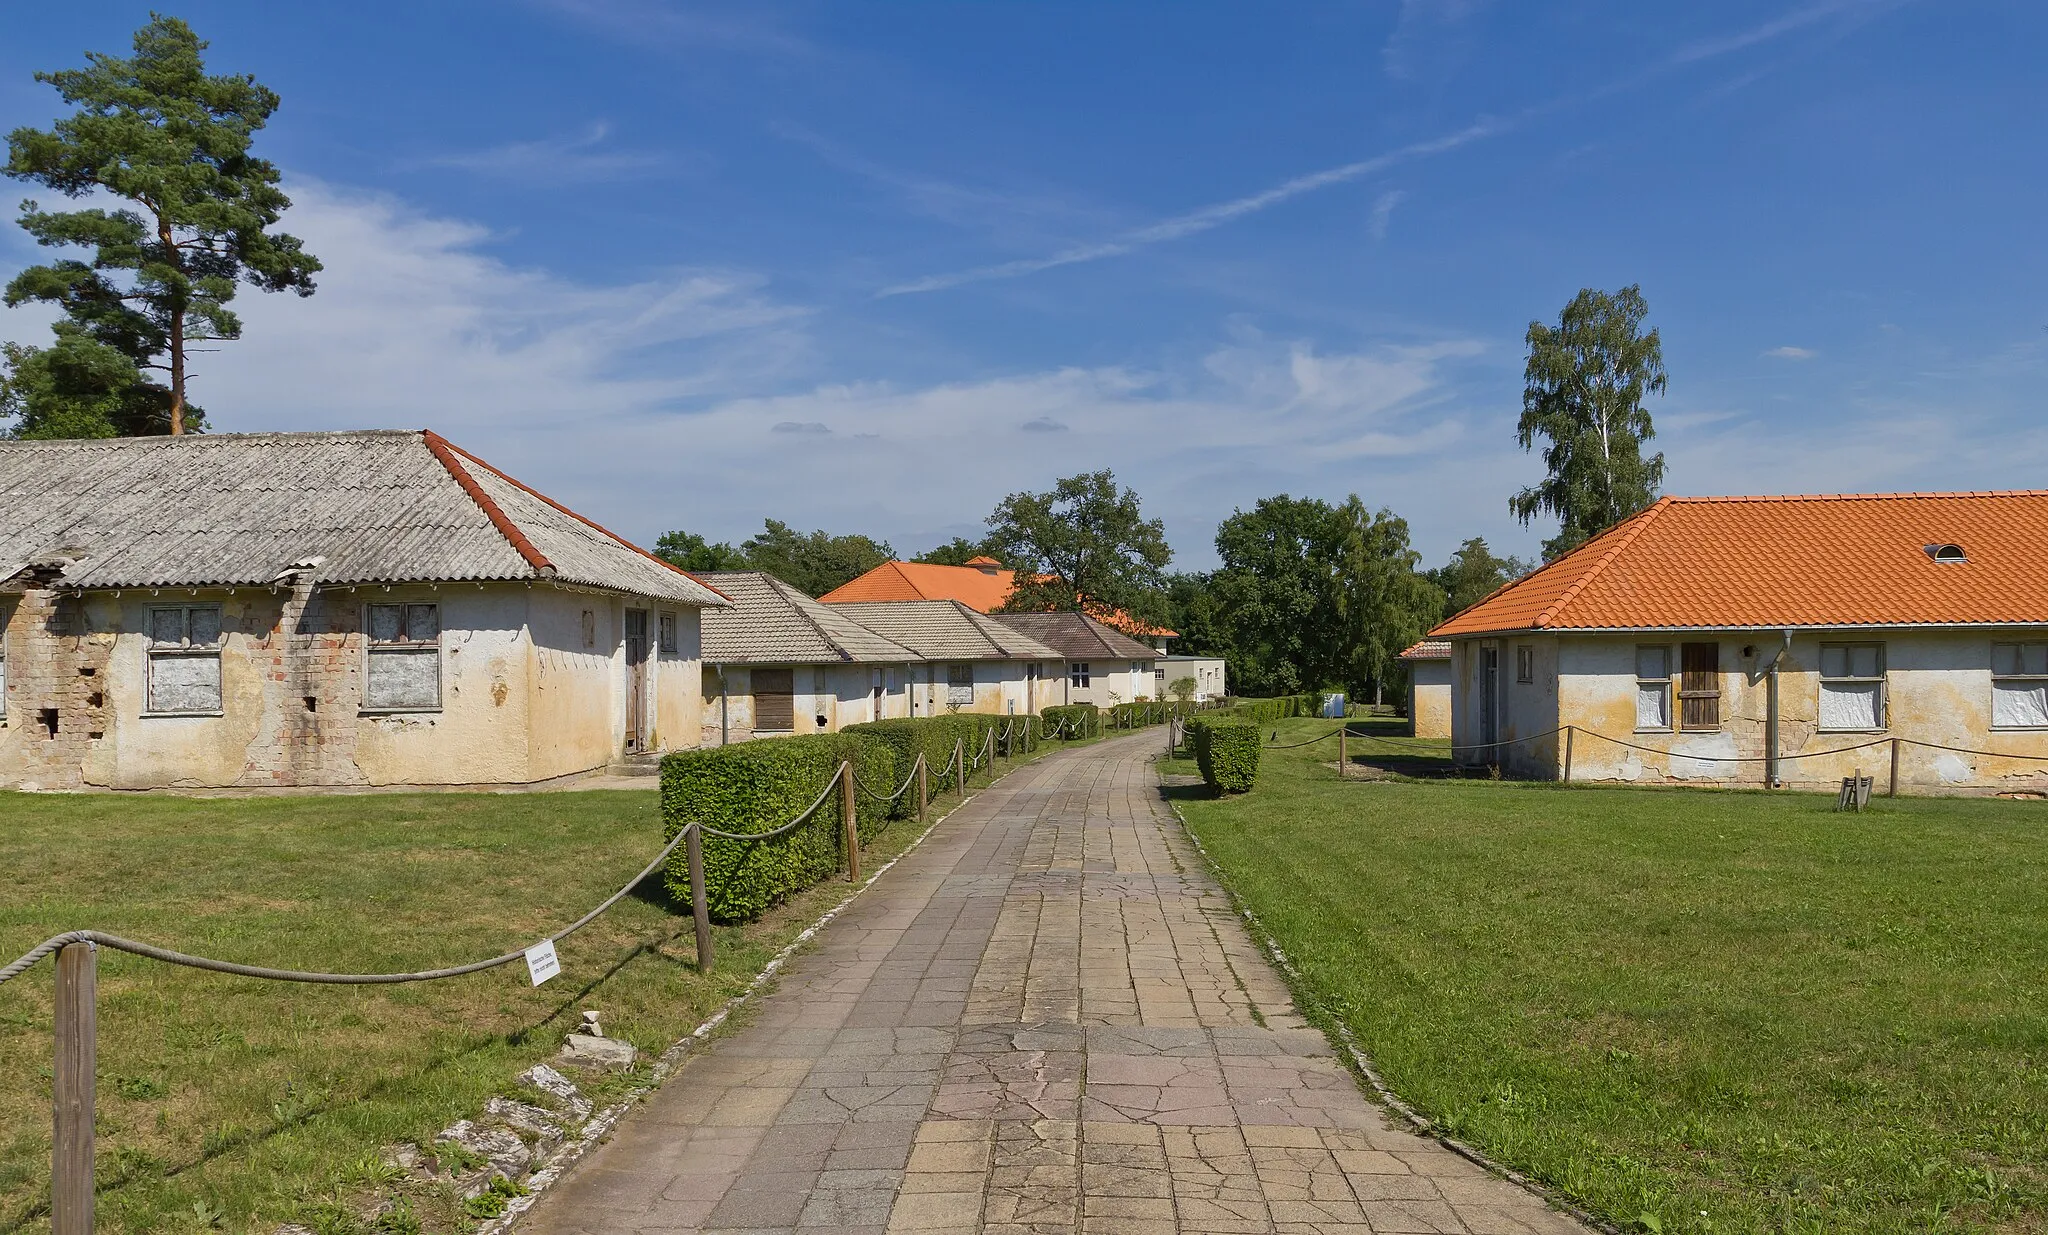 Photo showing: Former residential houses for sportspeople in the Berlin Olympic Village (built for the 1936 games) near Berlin, Germany